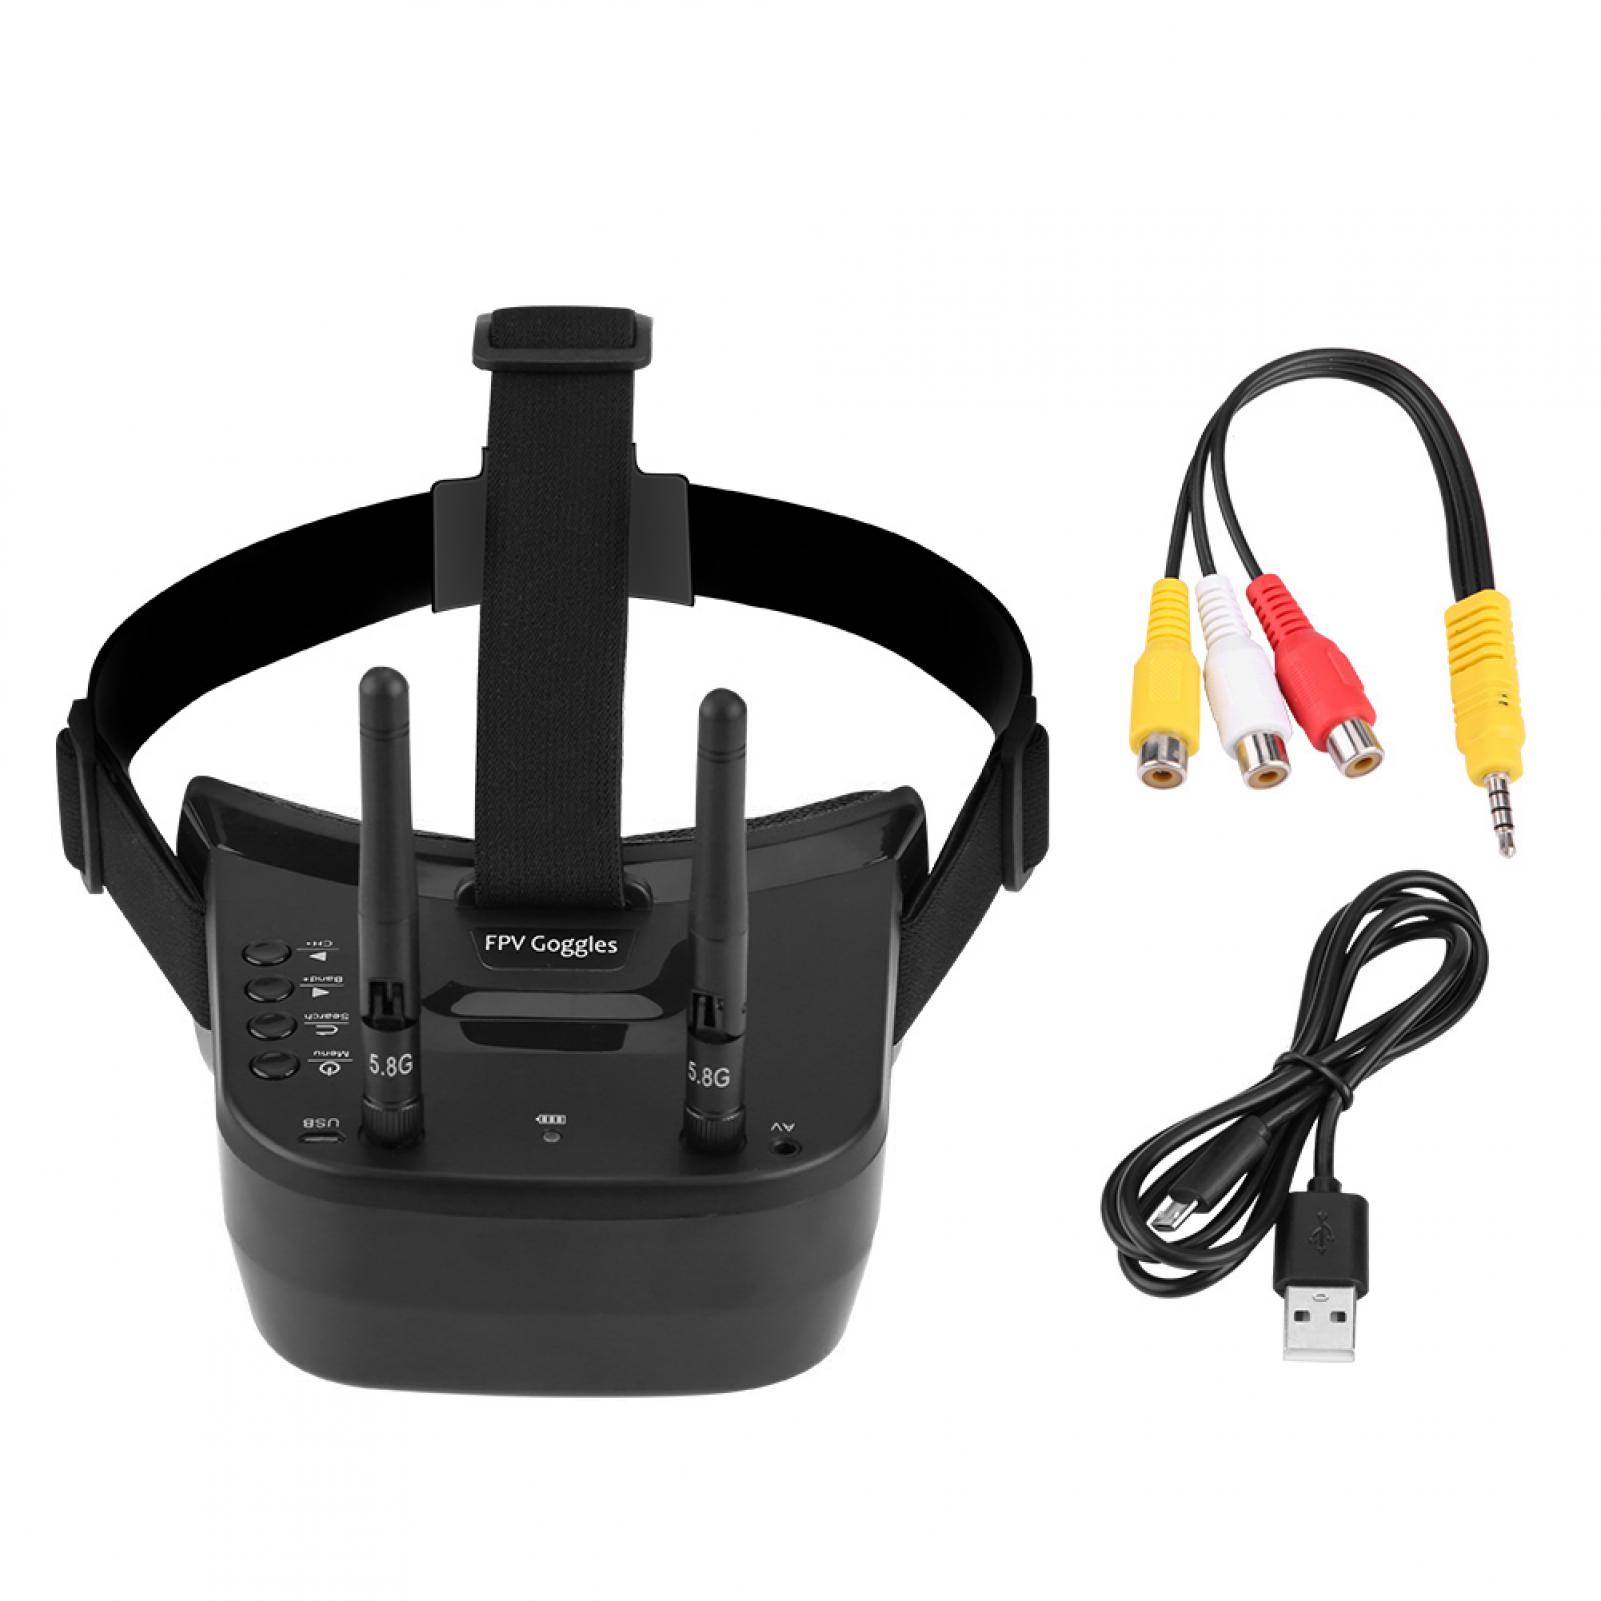 3" FPV Goggles with Long Battery Life